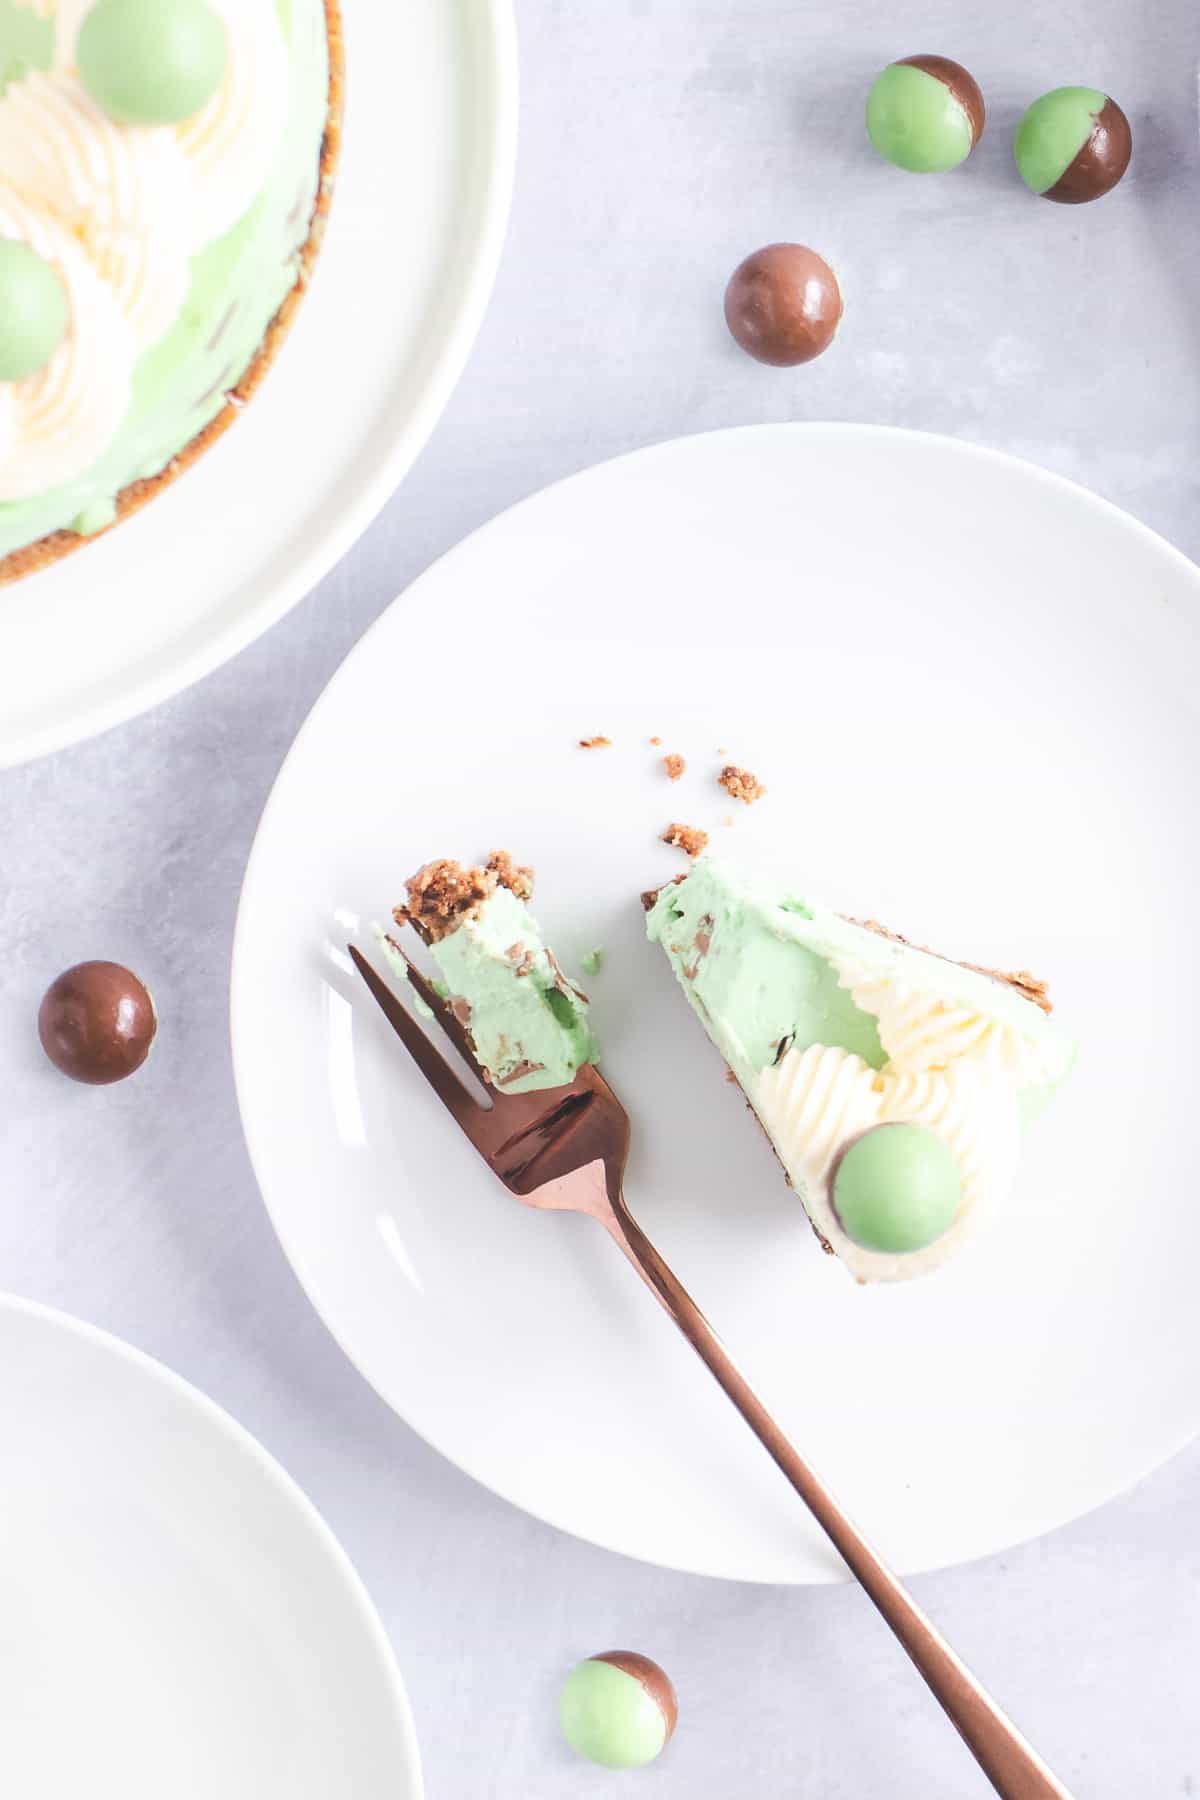 Slice of mint cheesecake on a plate with a fork next to it